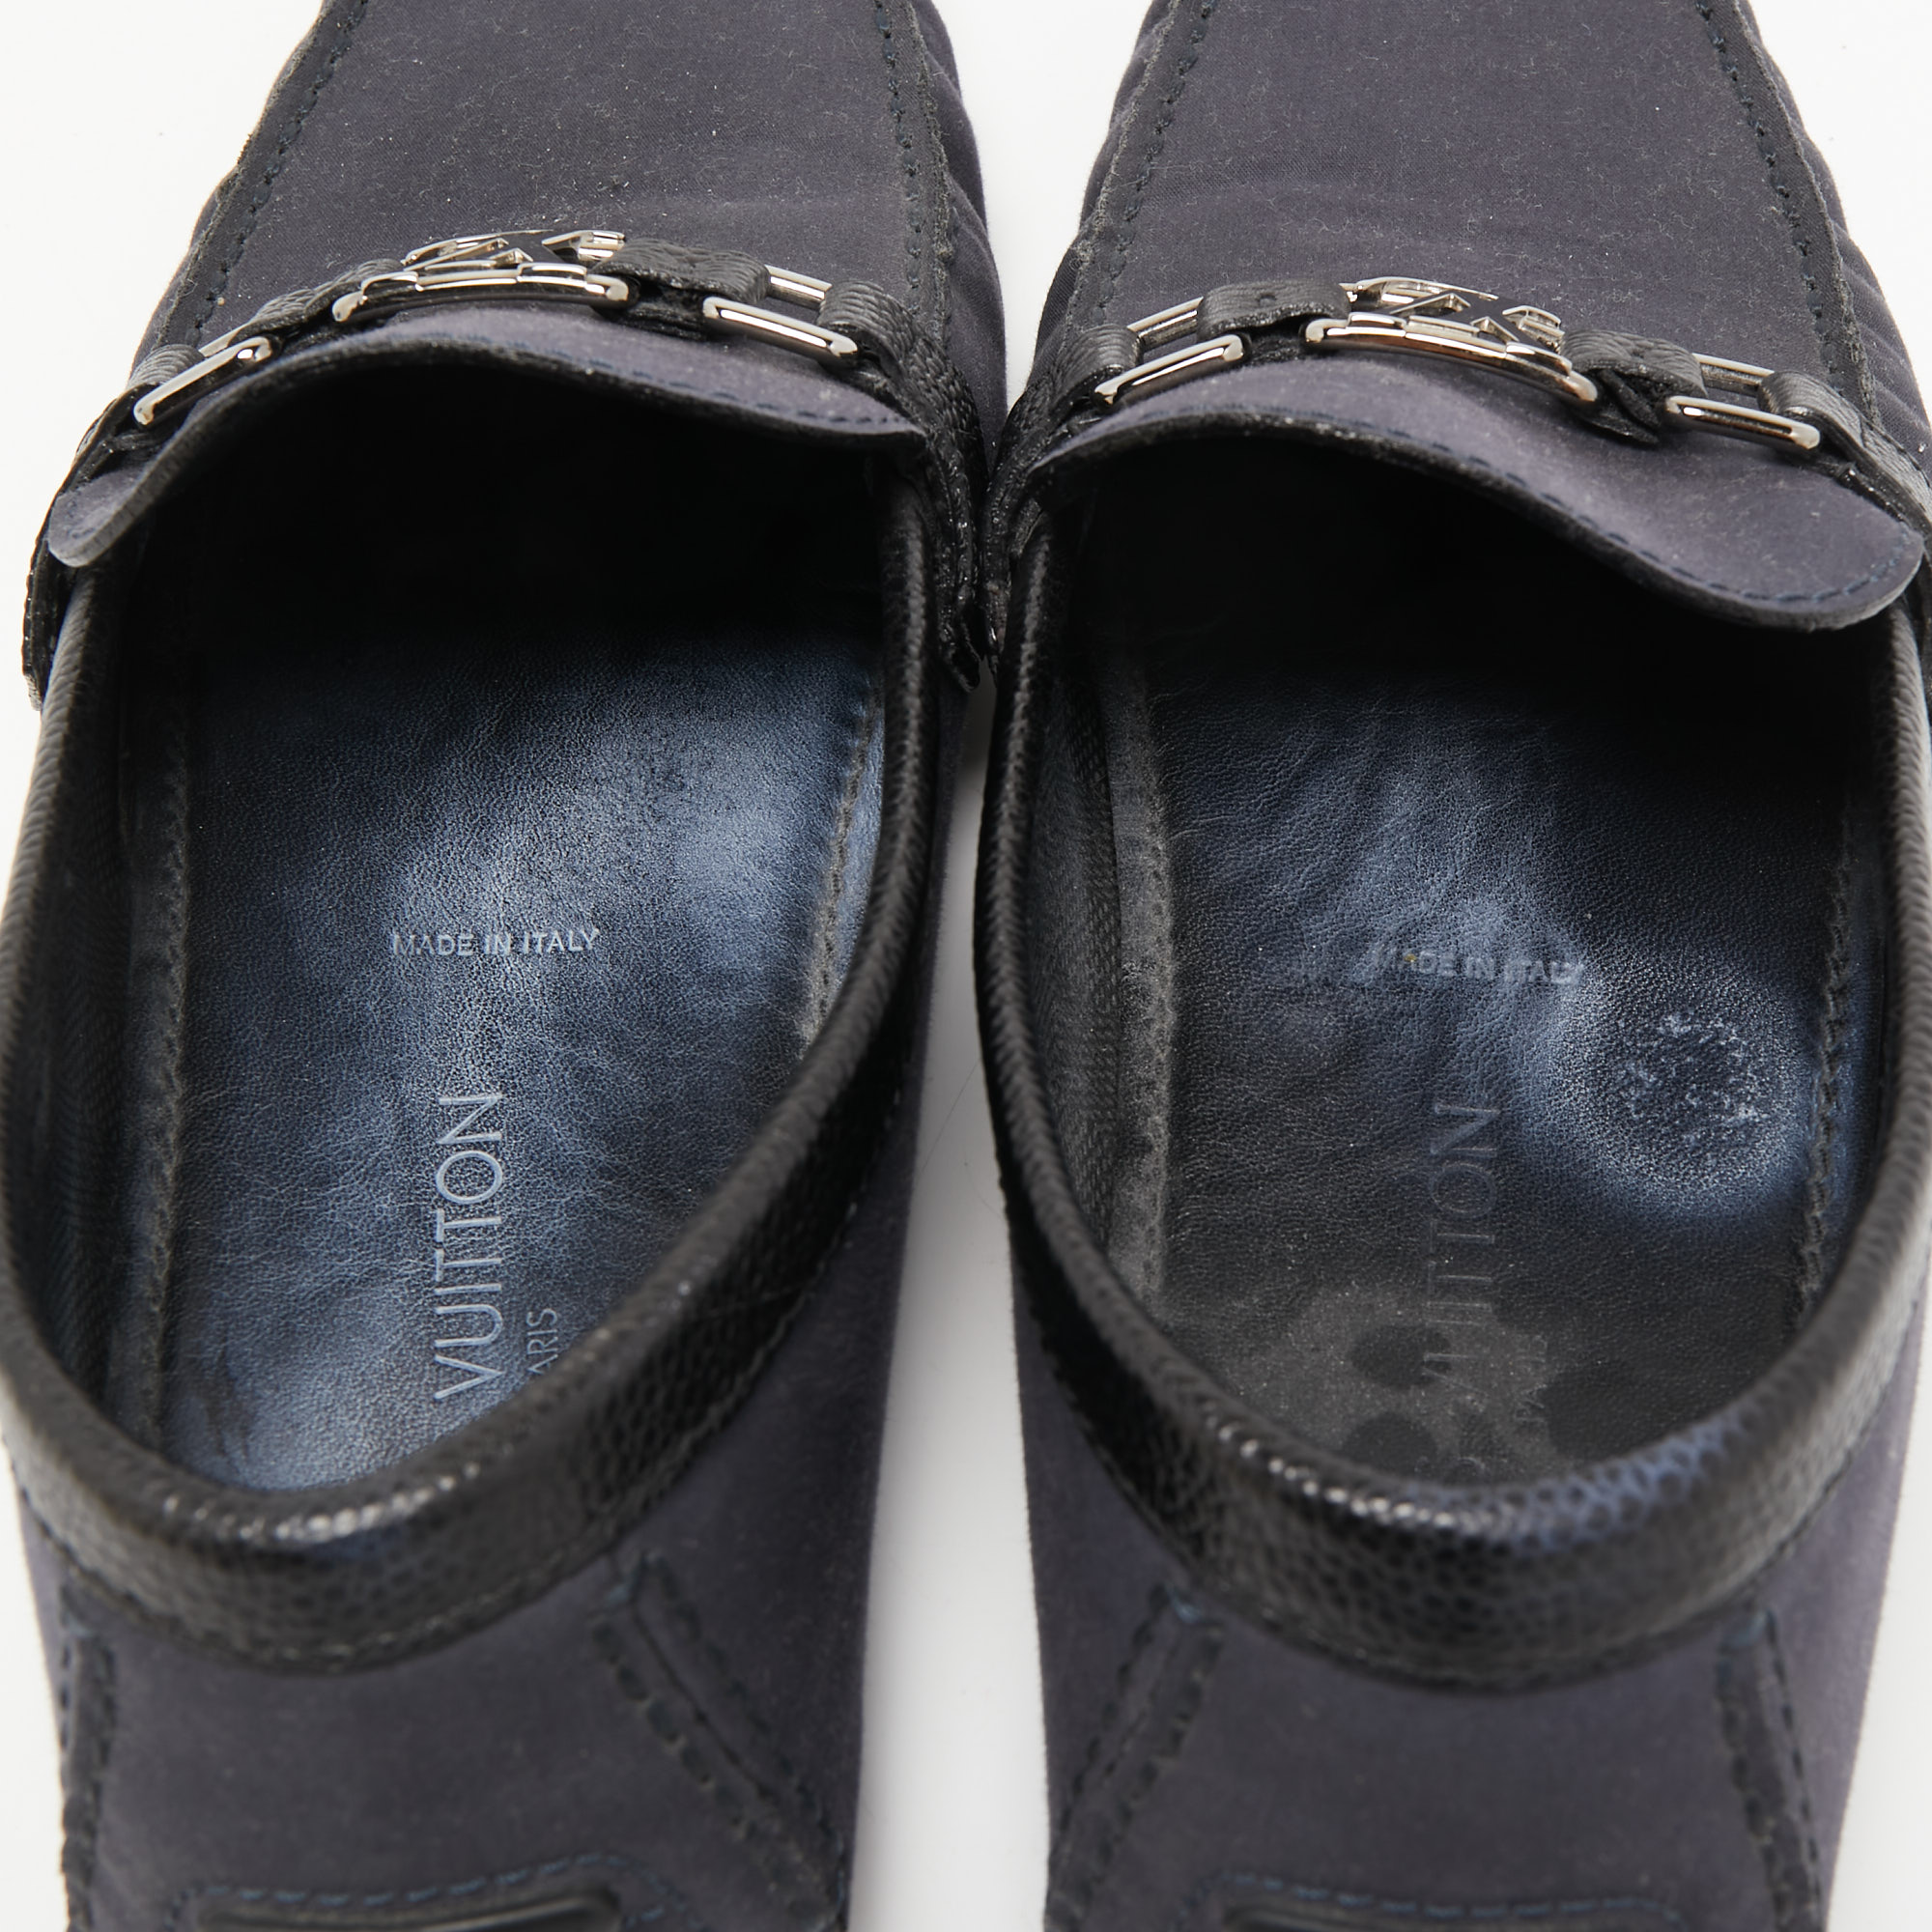 Louis Vuitton Navy Blue Canvas And Leather Hockenheim Loafers Size 44